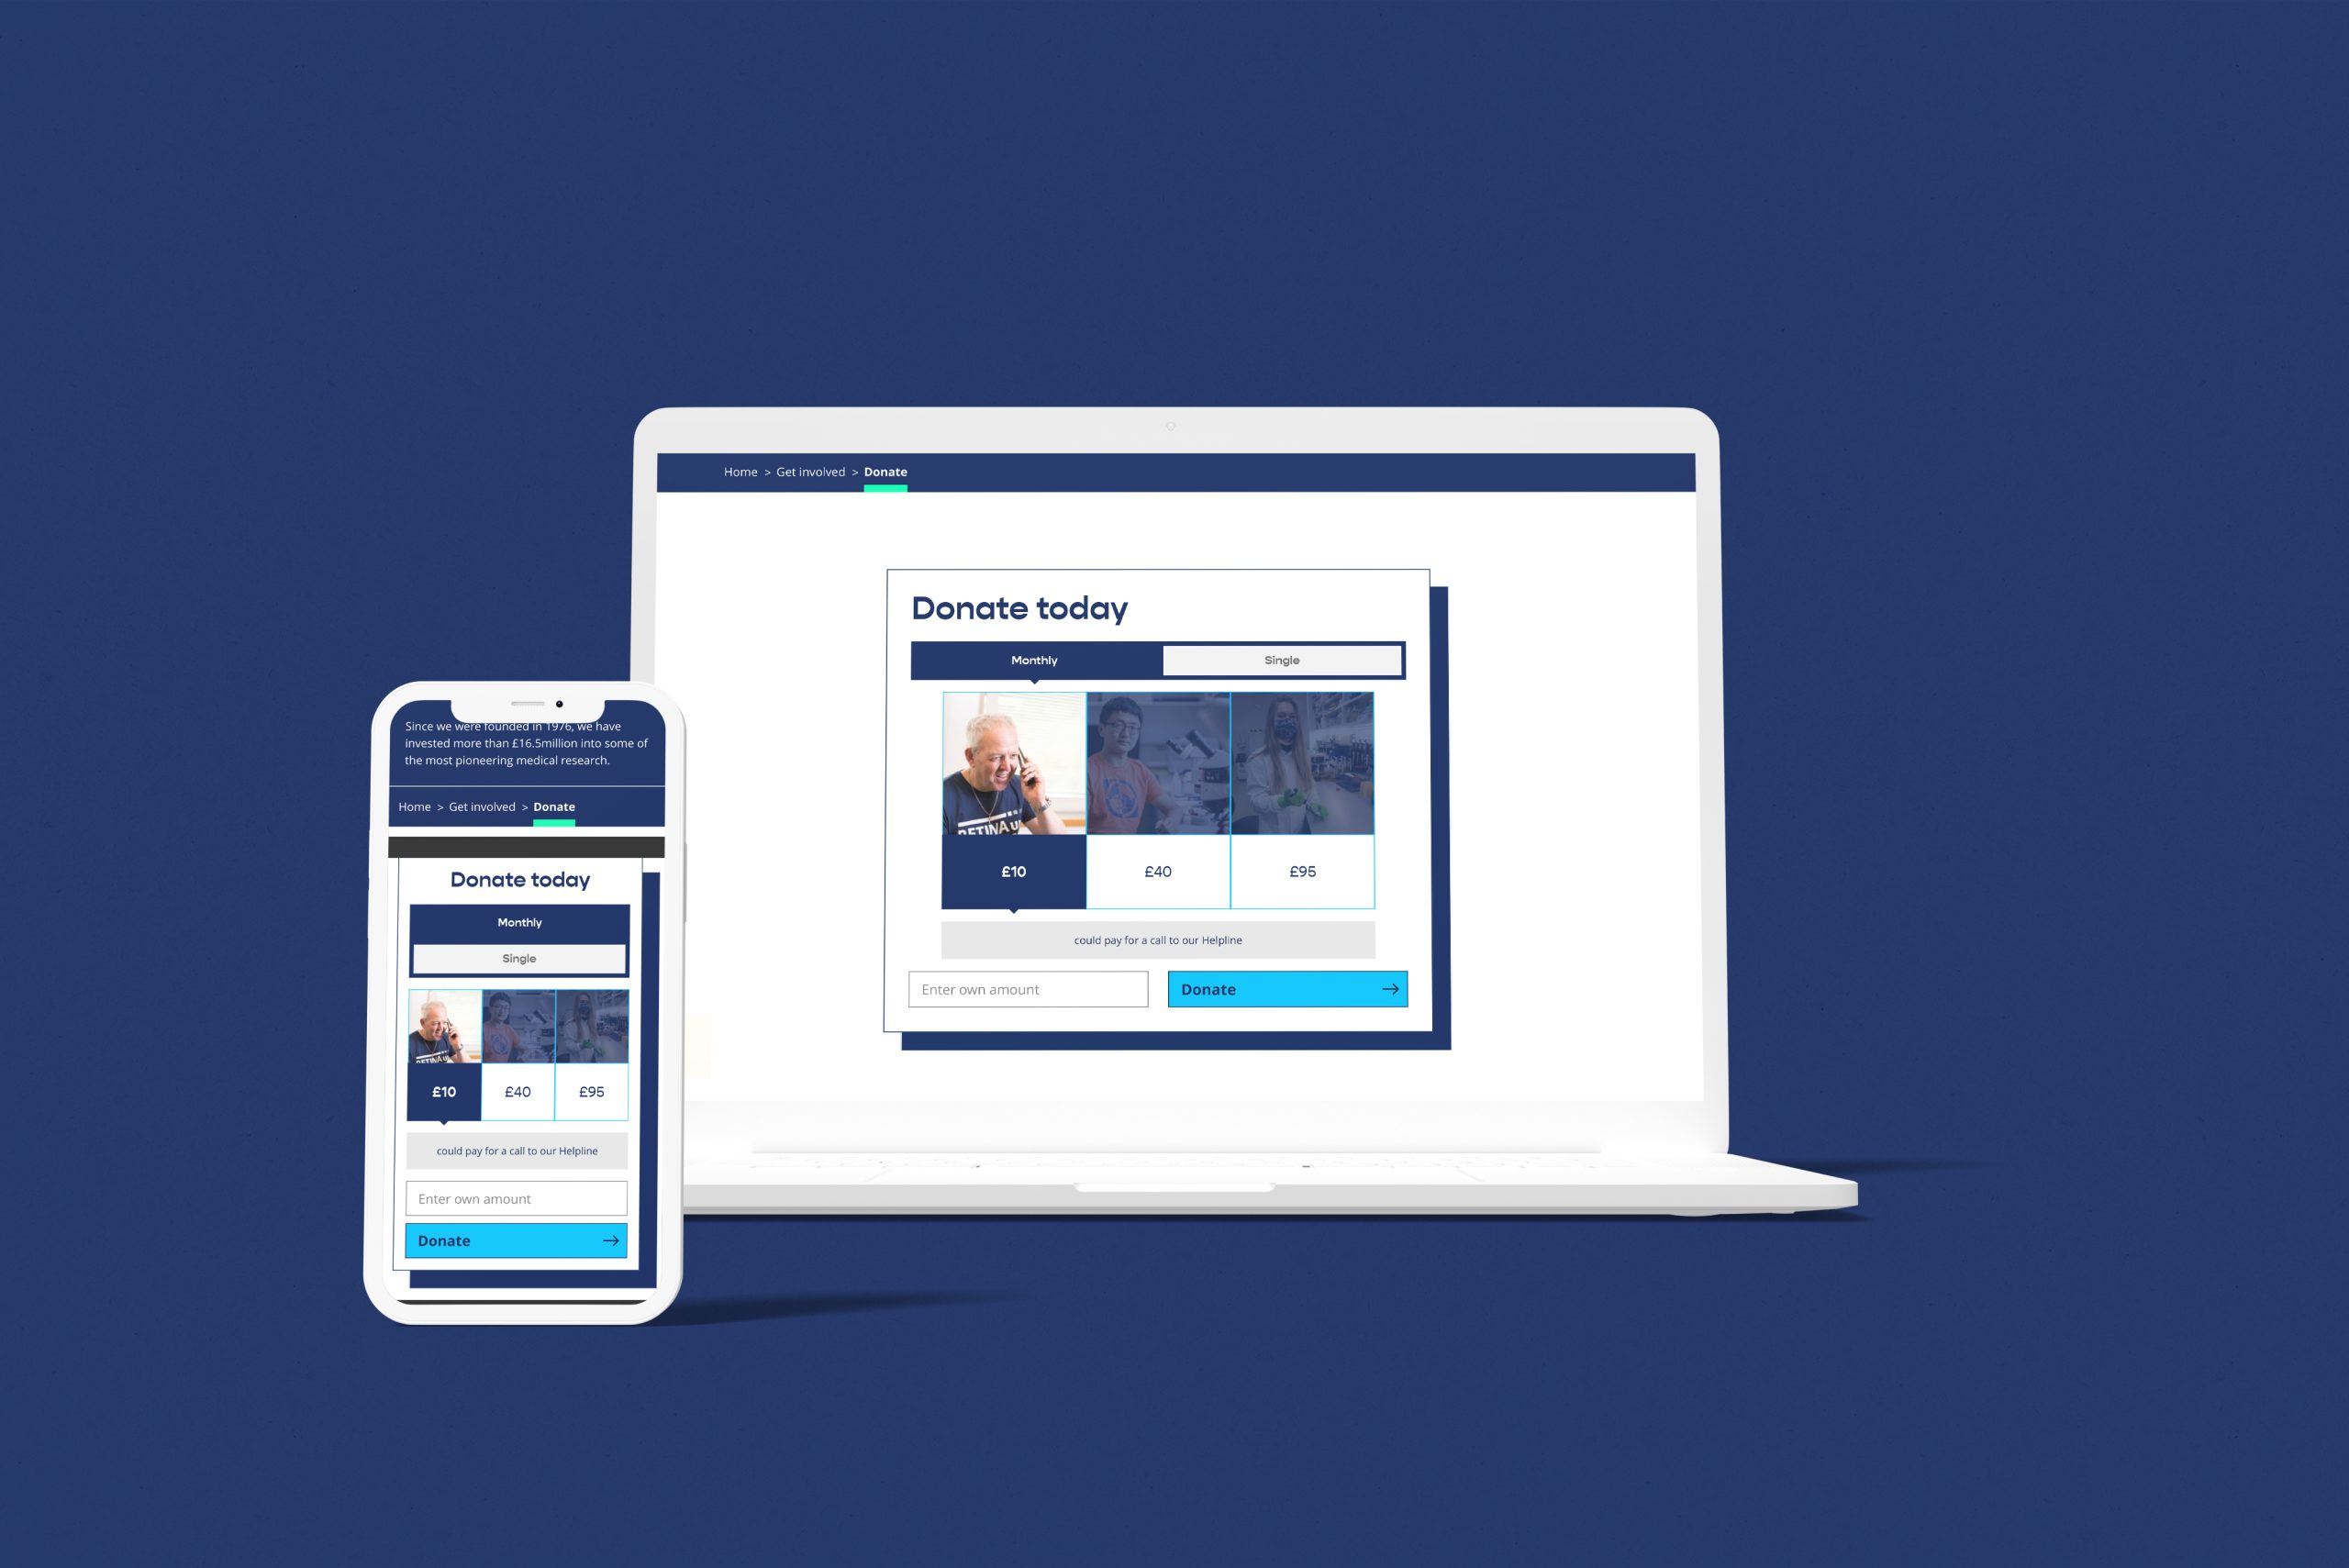 An image of the new donation page for Retina UK's website, displayed on mobile and desktop devices, on a dark blue background